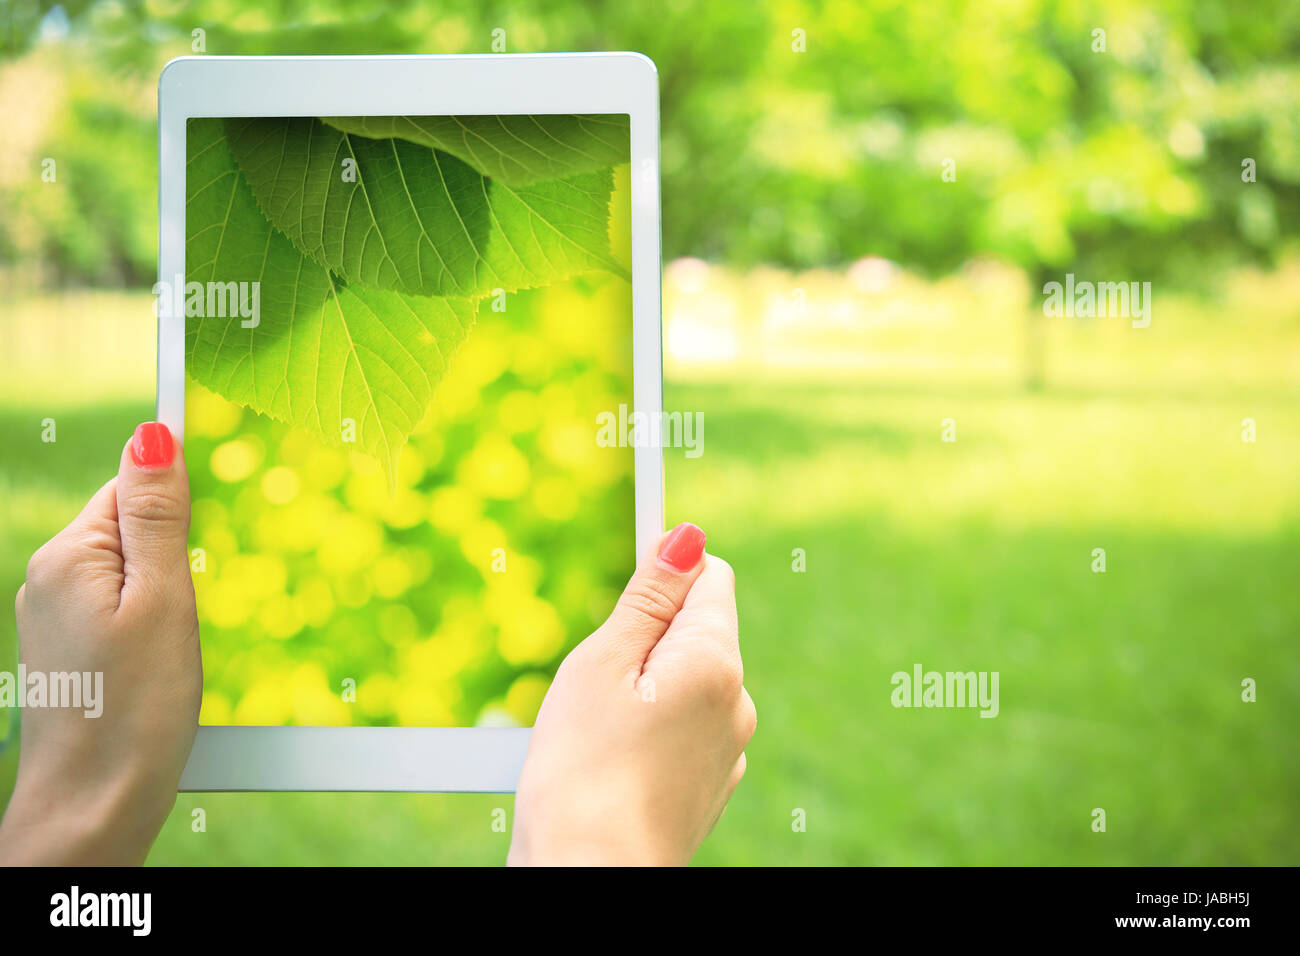 Summer background. White tablet in hand on green nature background. Tablet with vivid green picture on screen in girl hand. Stock Photo